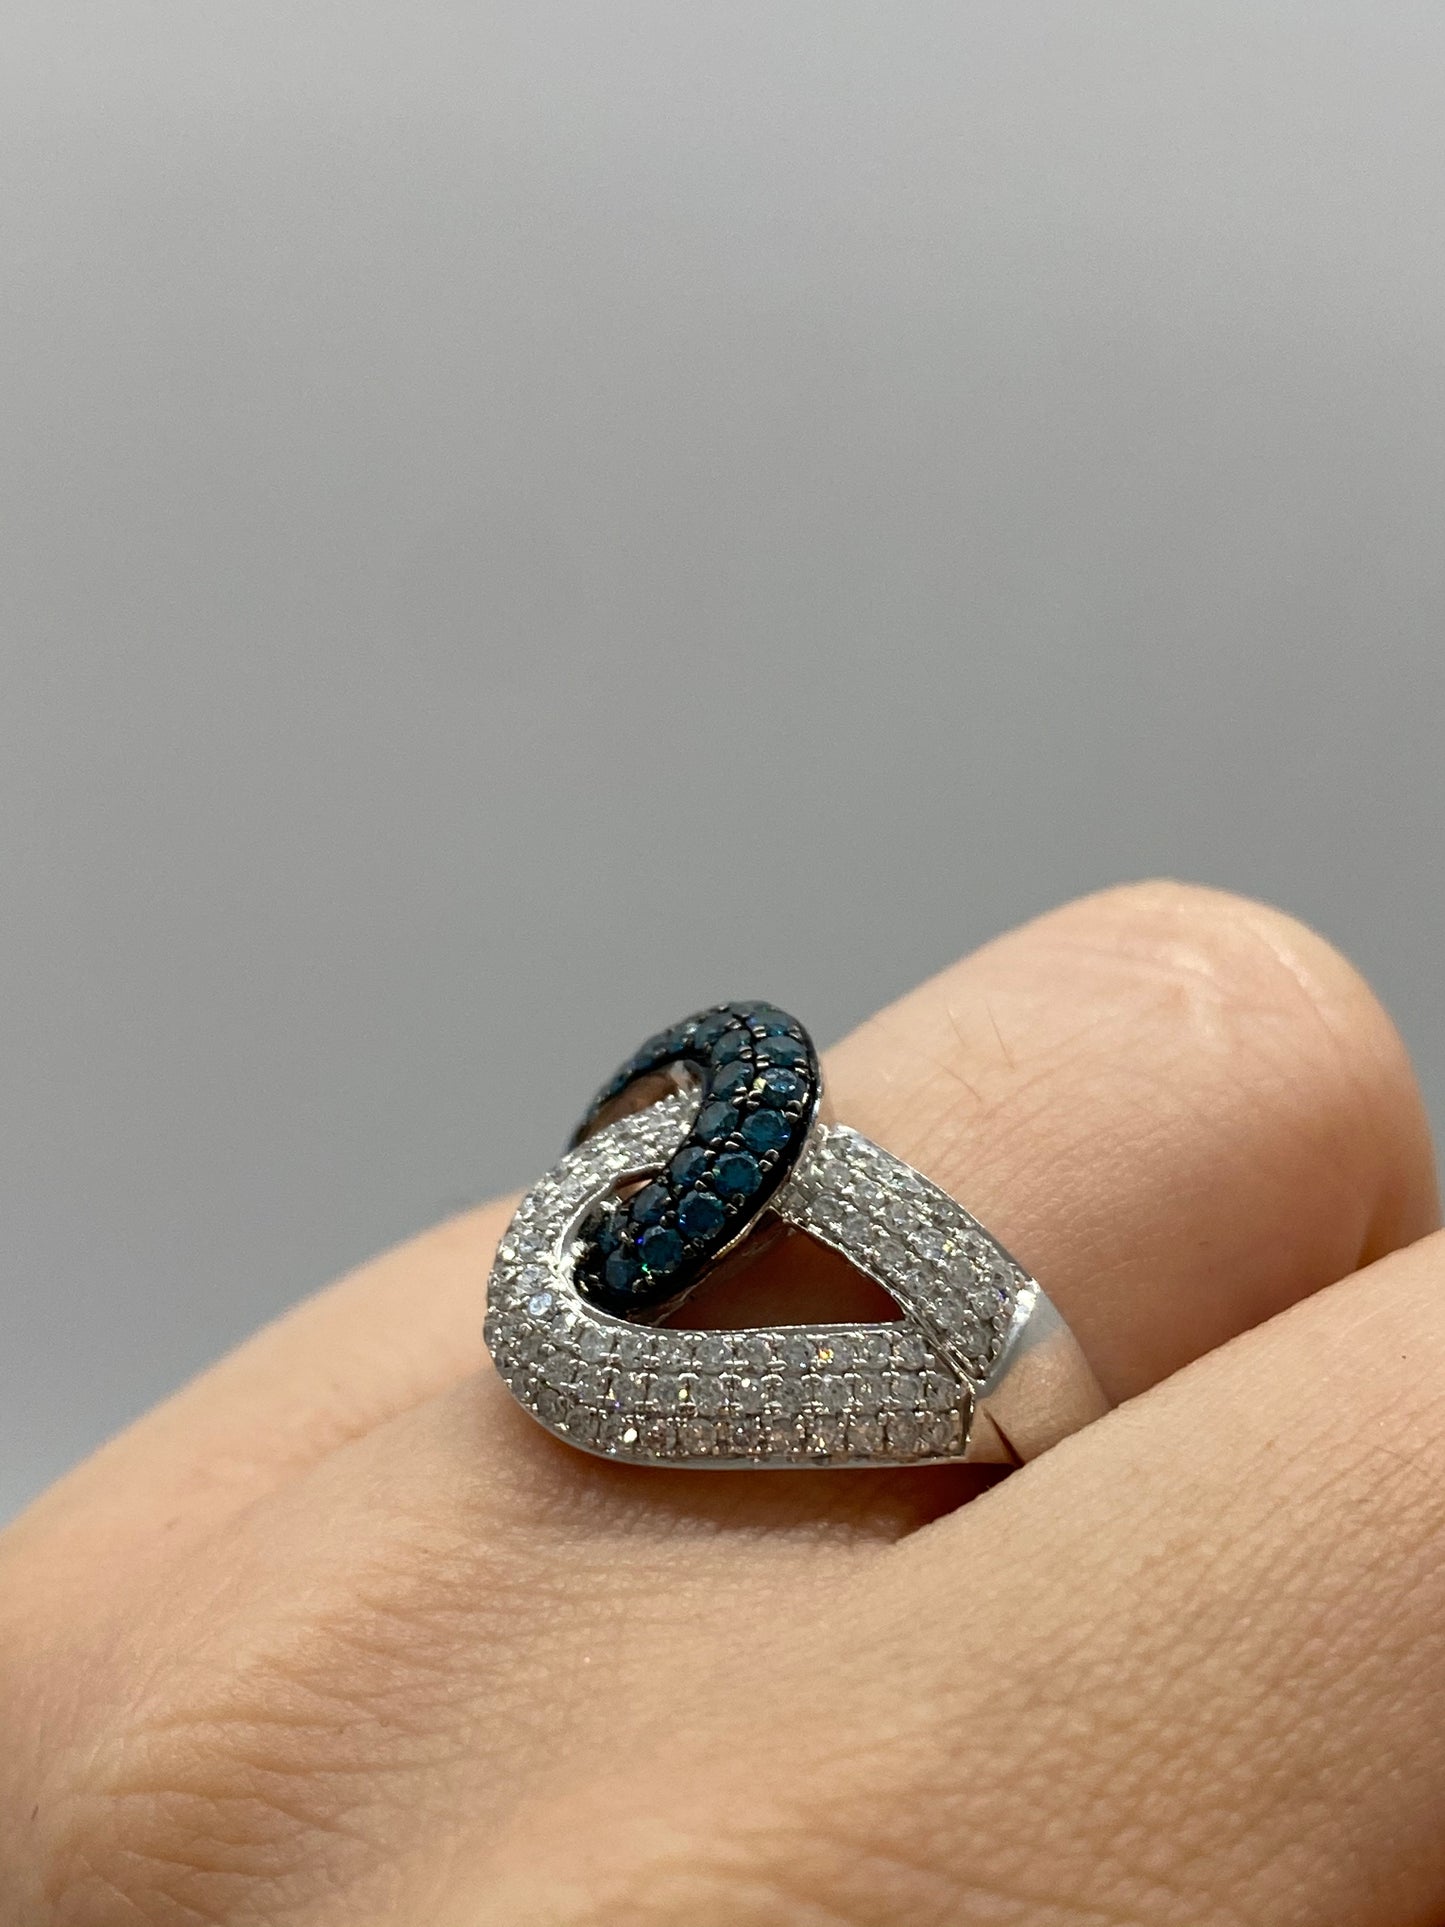 Blue Diamond Ring R18199 - Royal Gems and Jewelry